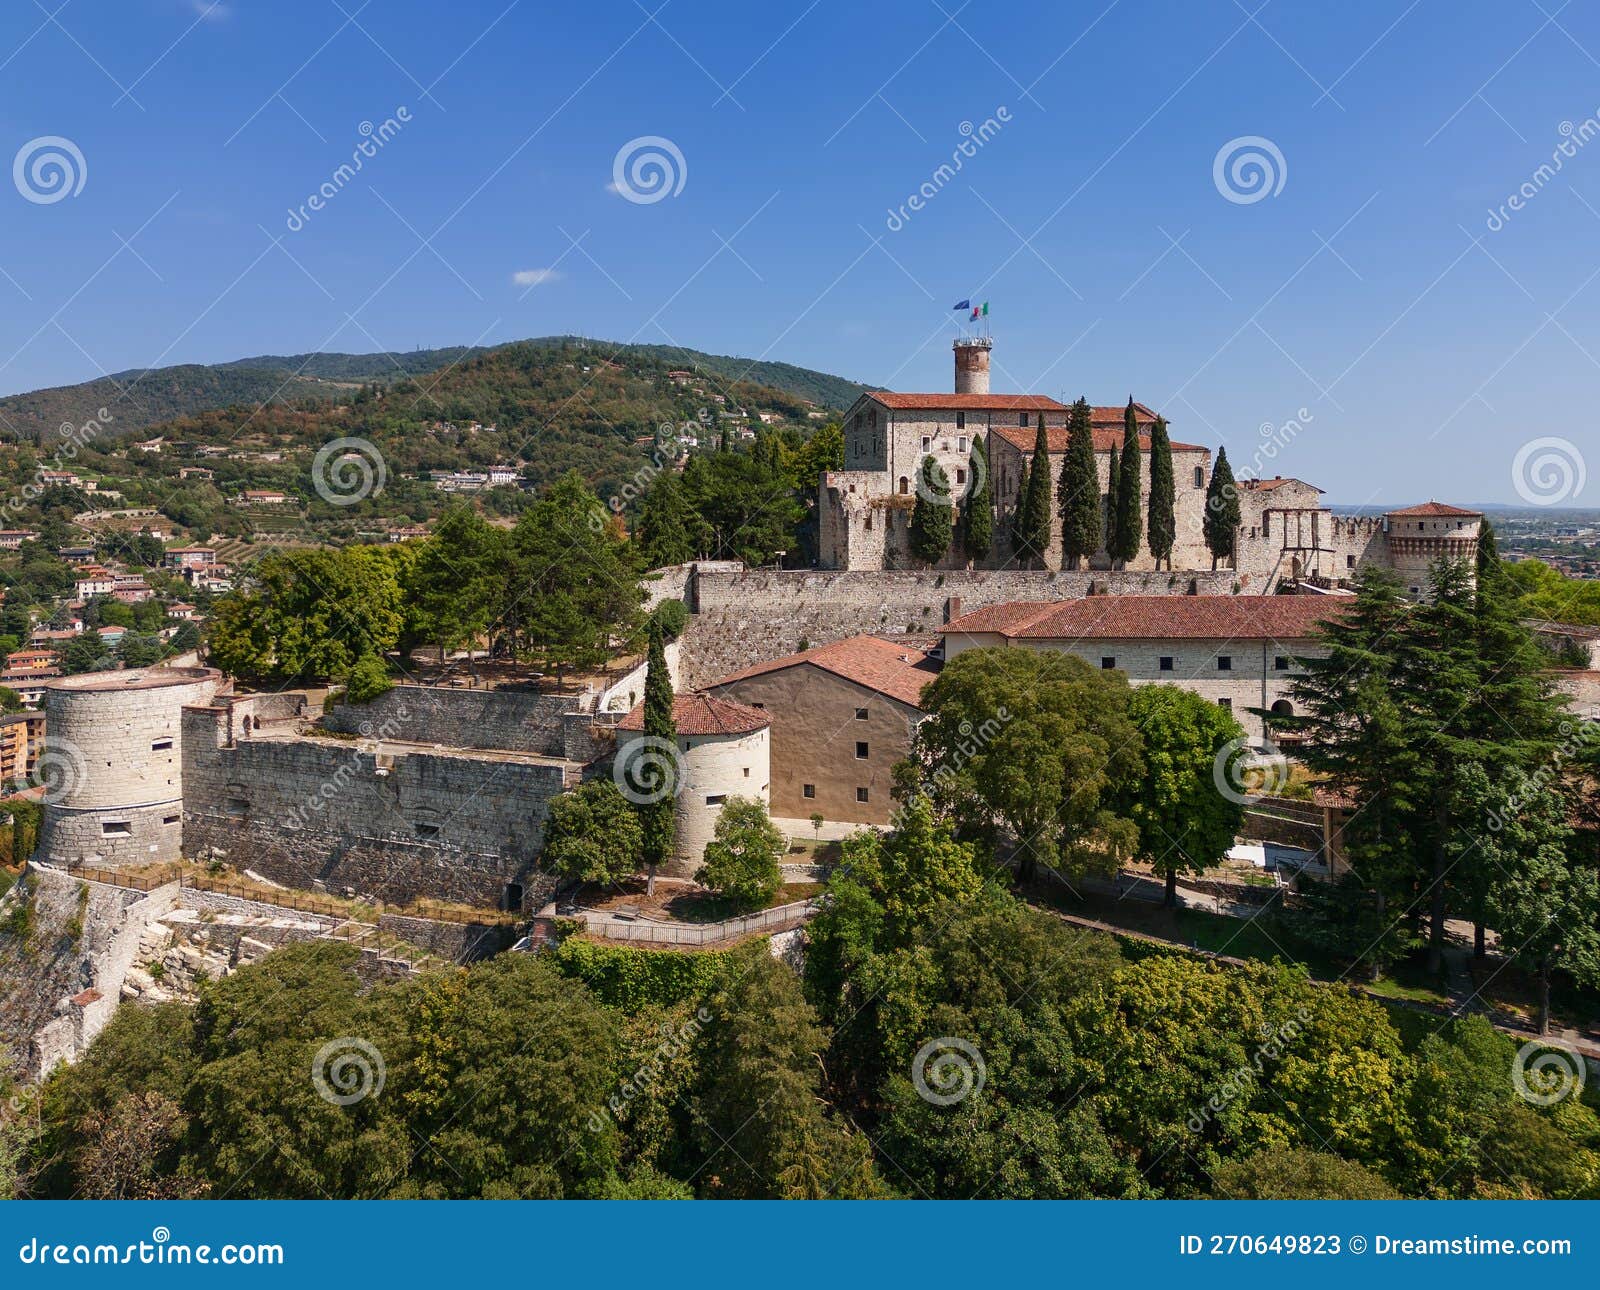 panoramic drone view of the western part of the historic castle on a hill (colle cidneo) in the city of brescia